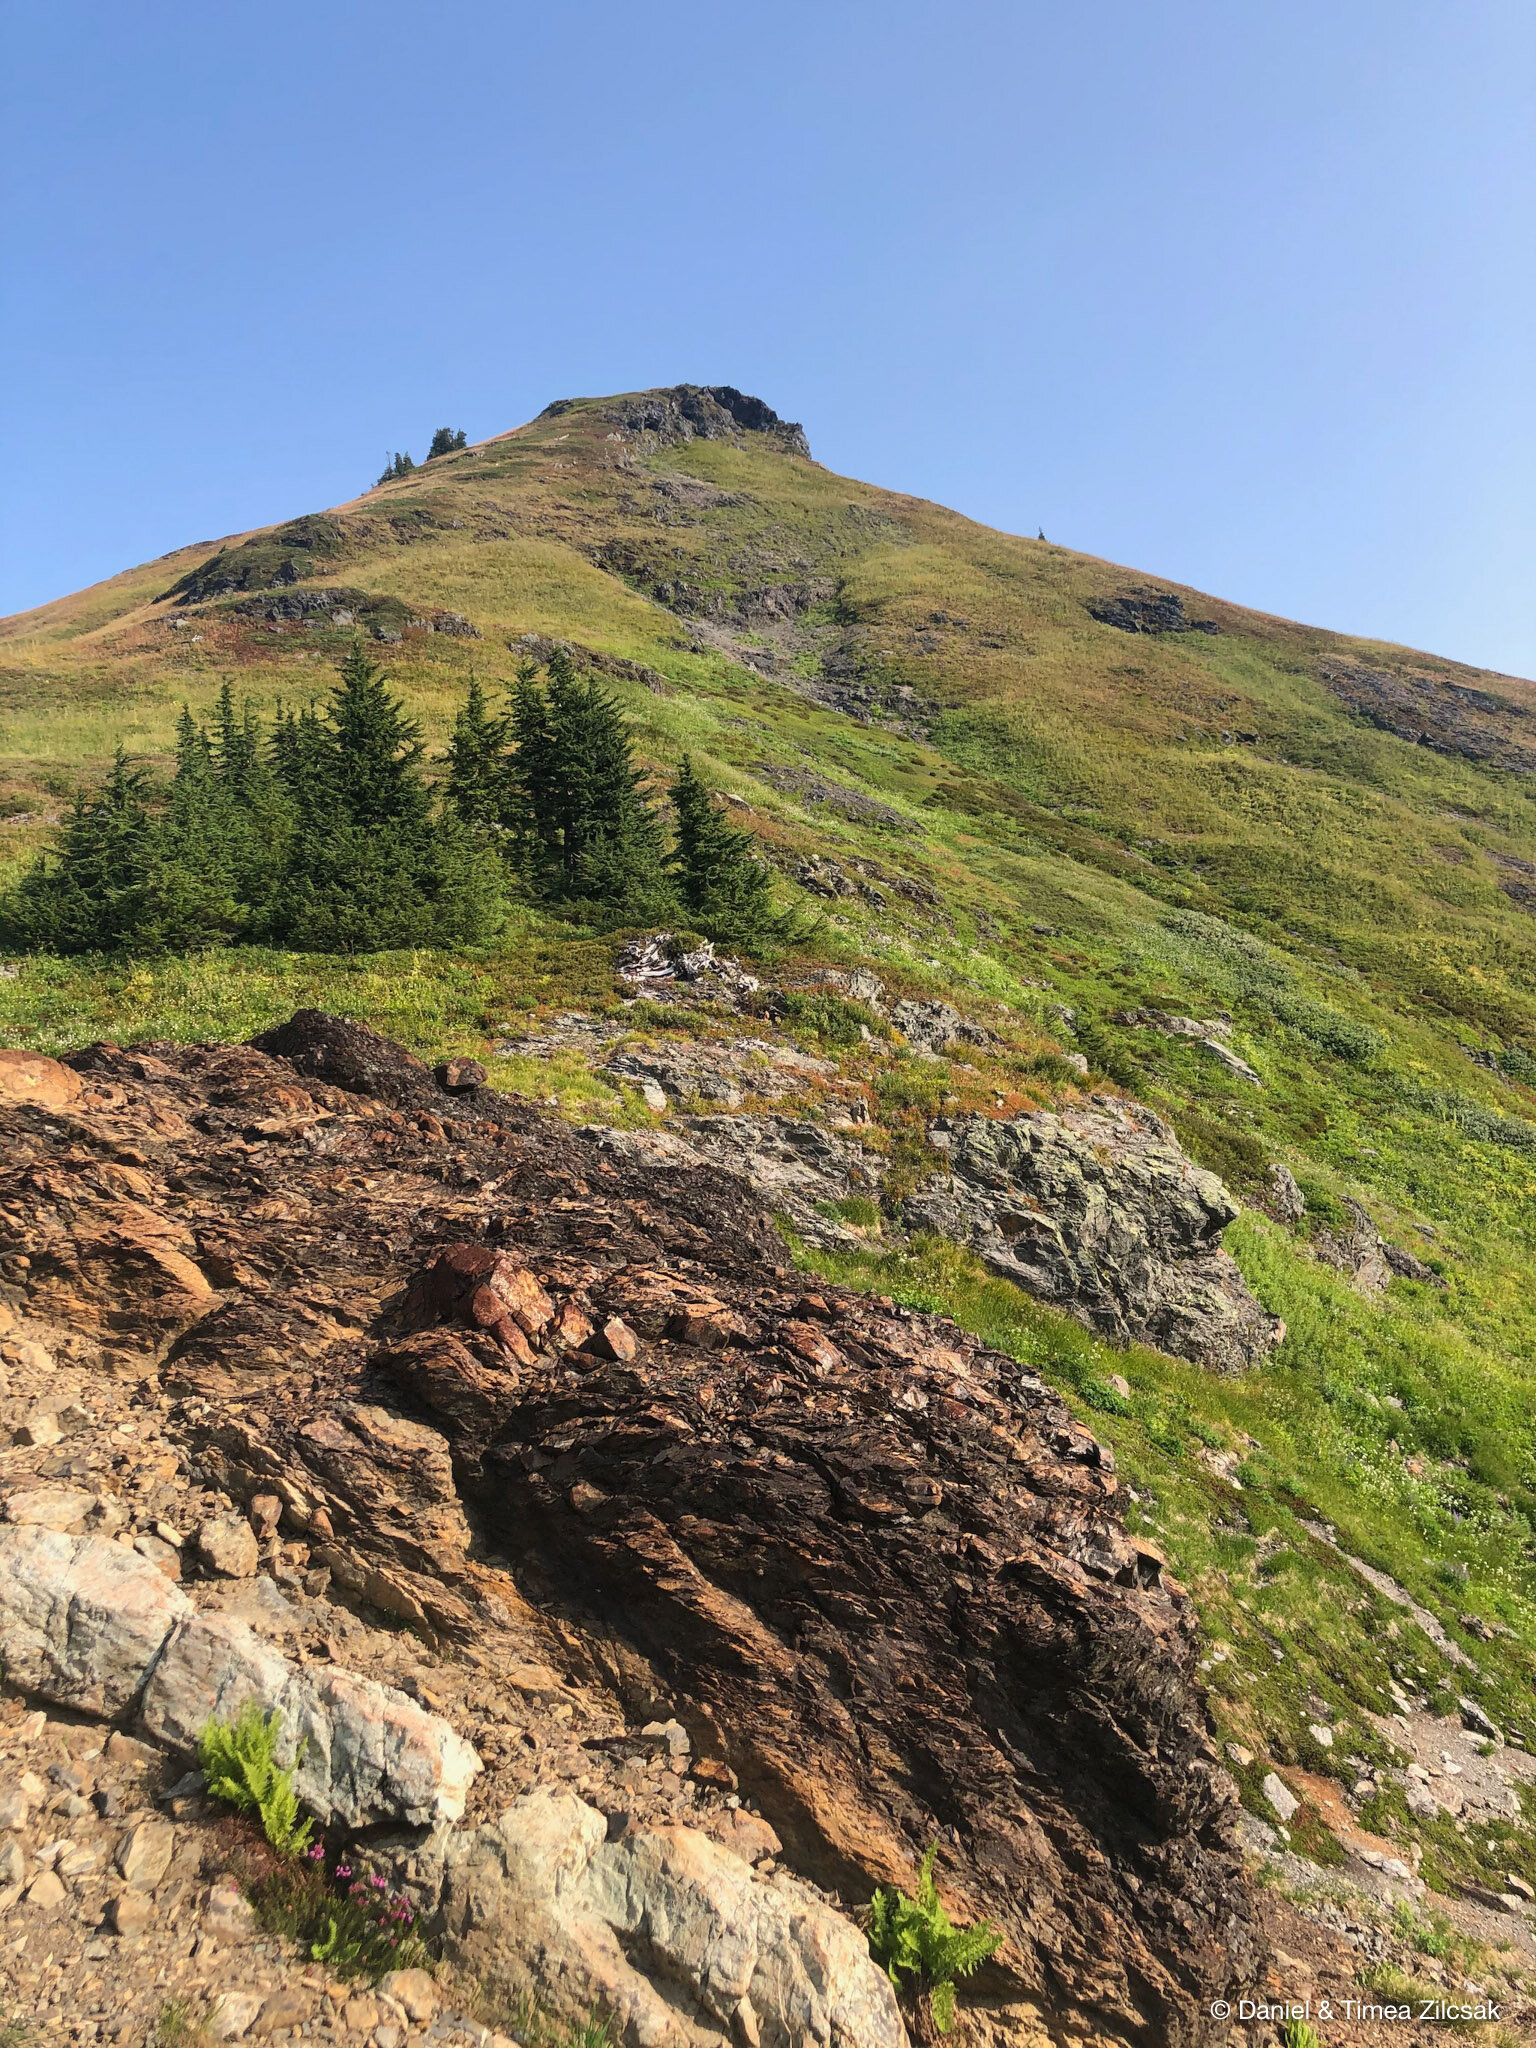 View of Yellow Aster Butte's false summit from the trail